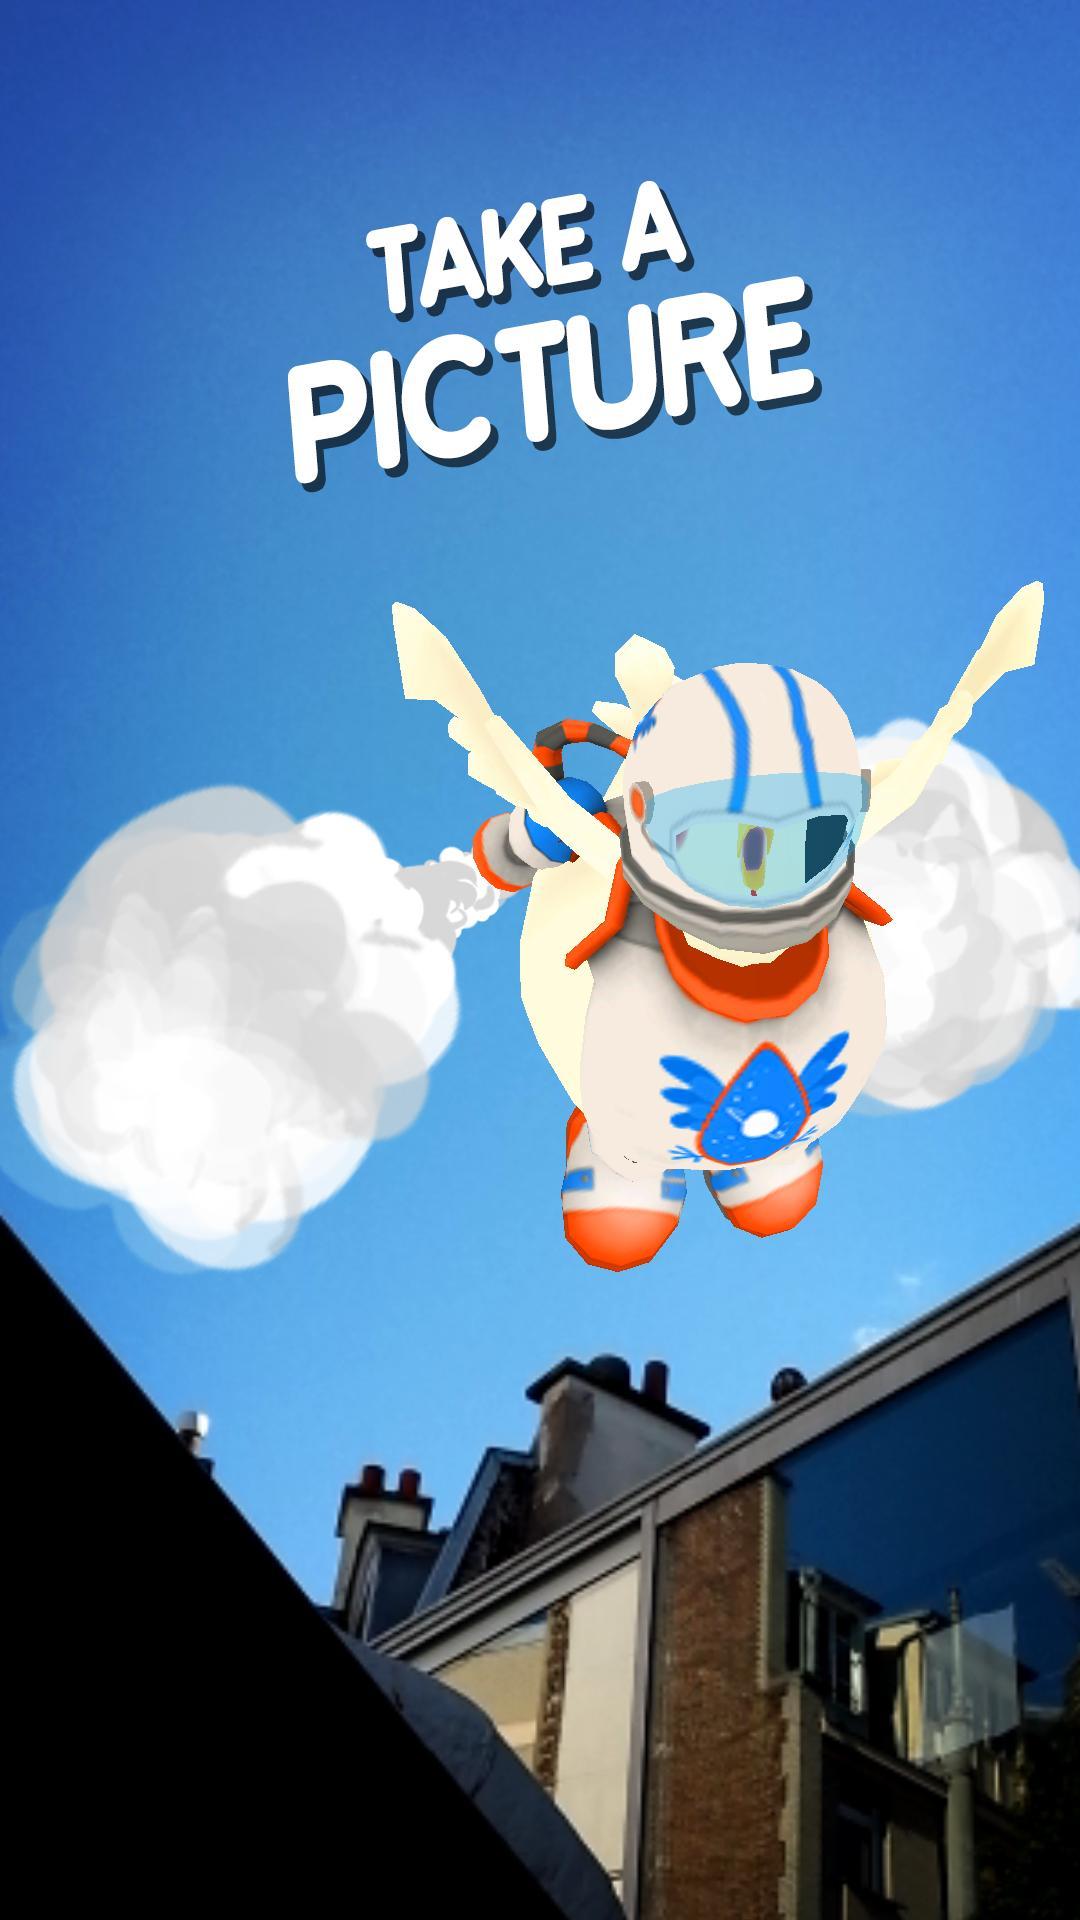 Oscar's Oasis - Flying Chicken APK pour Android Télécharger